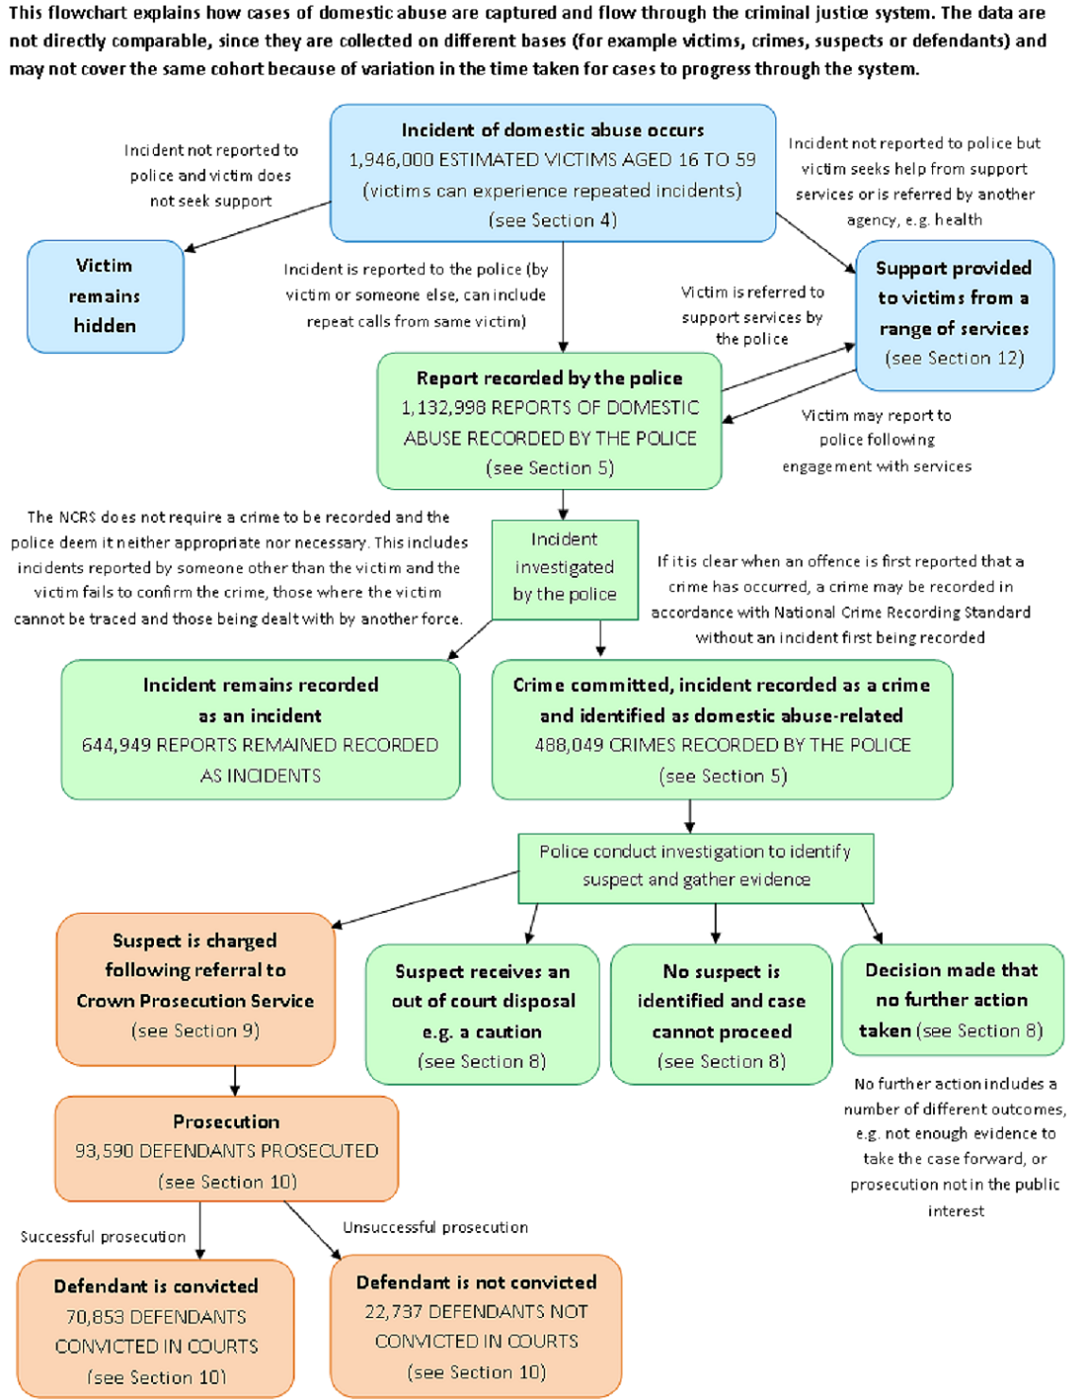 Flowchart explains how cases of domestic abuse are captured and flow through the criminal justice system.